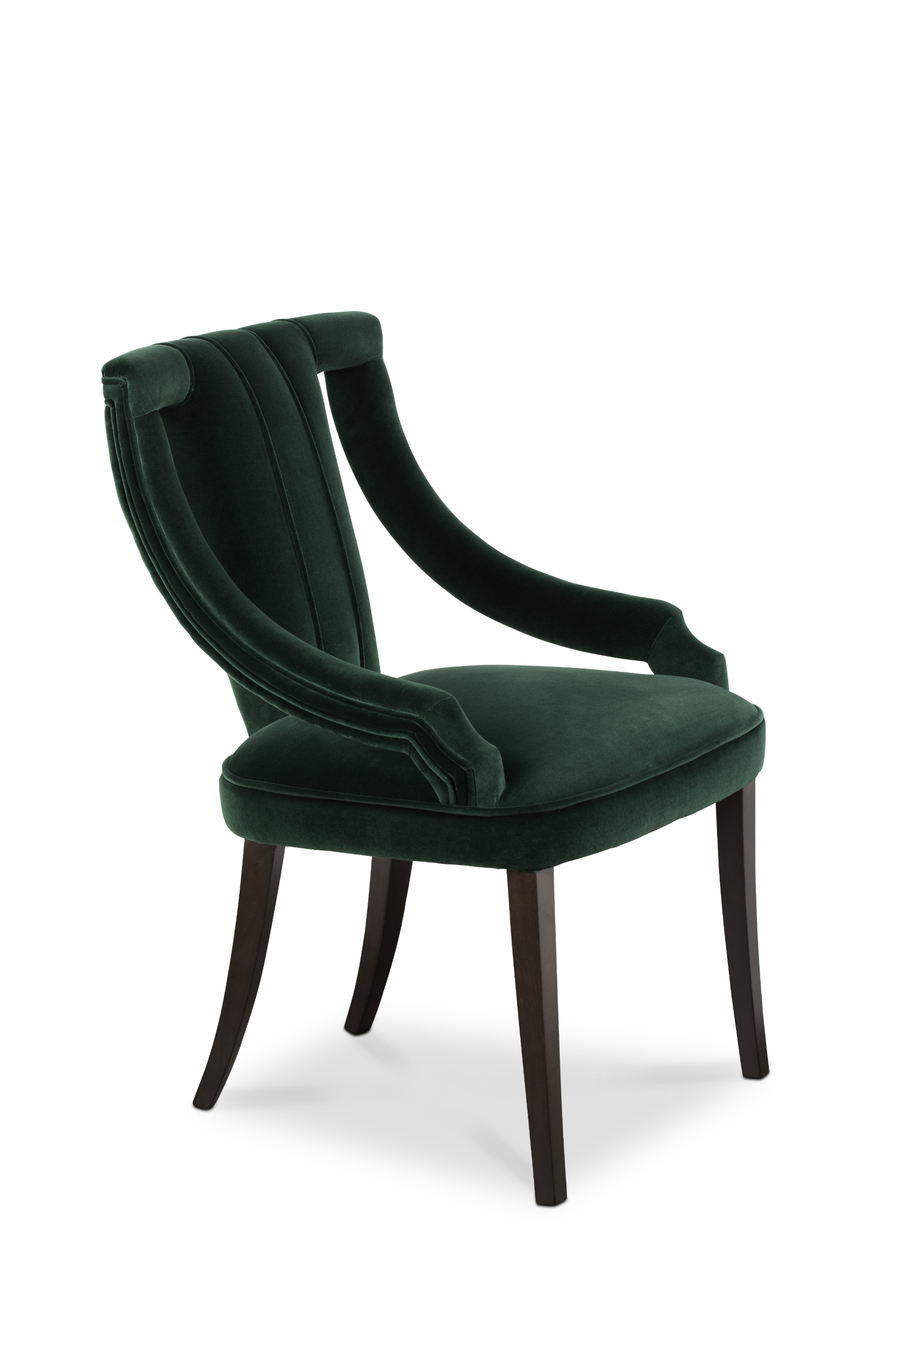 upholstered in green velvet and with legs in ash with walnut stain varnish dining chair